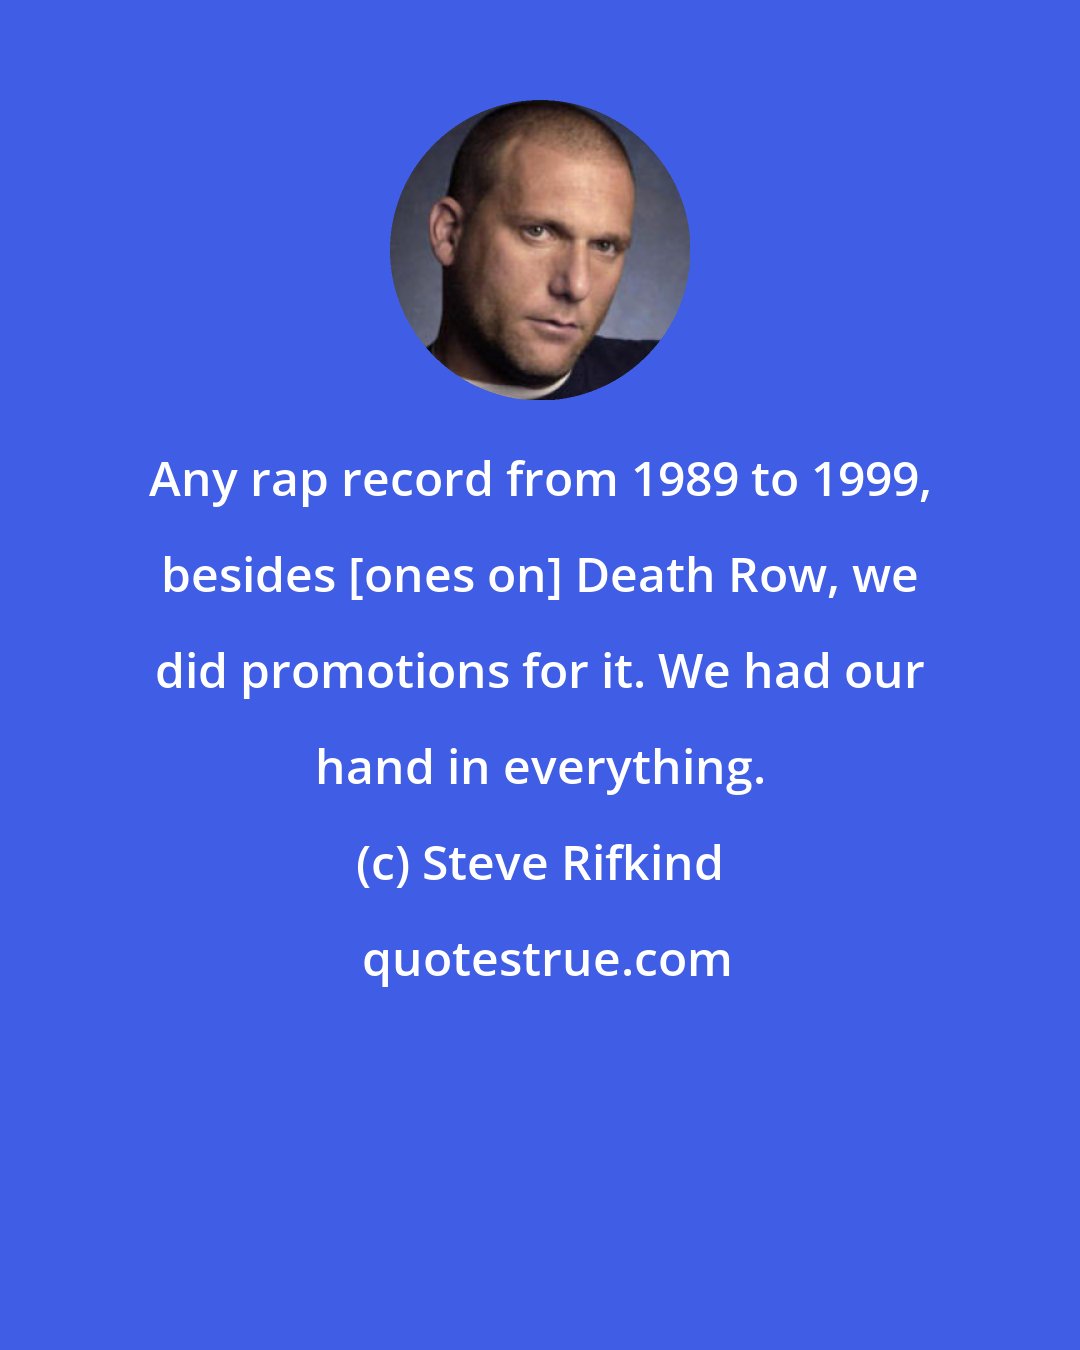 Steve Rifkind: Any rap record from 1989 to 1999, besides [ones on] Death Row, we did promotions for it. We had our hand in everything.